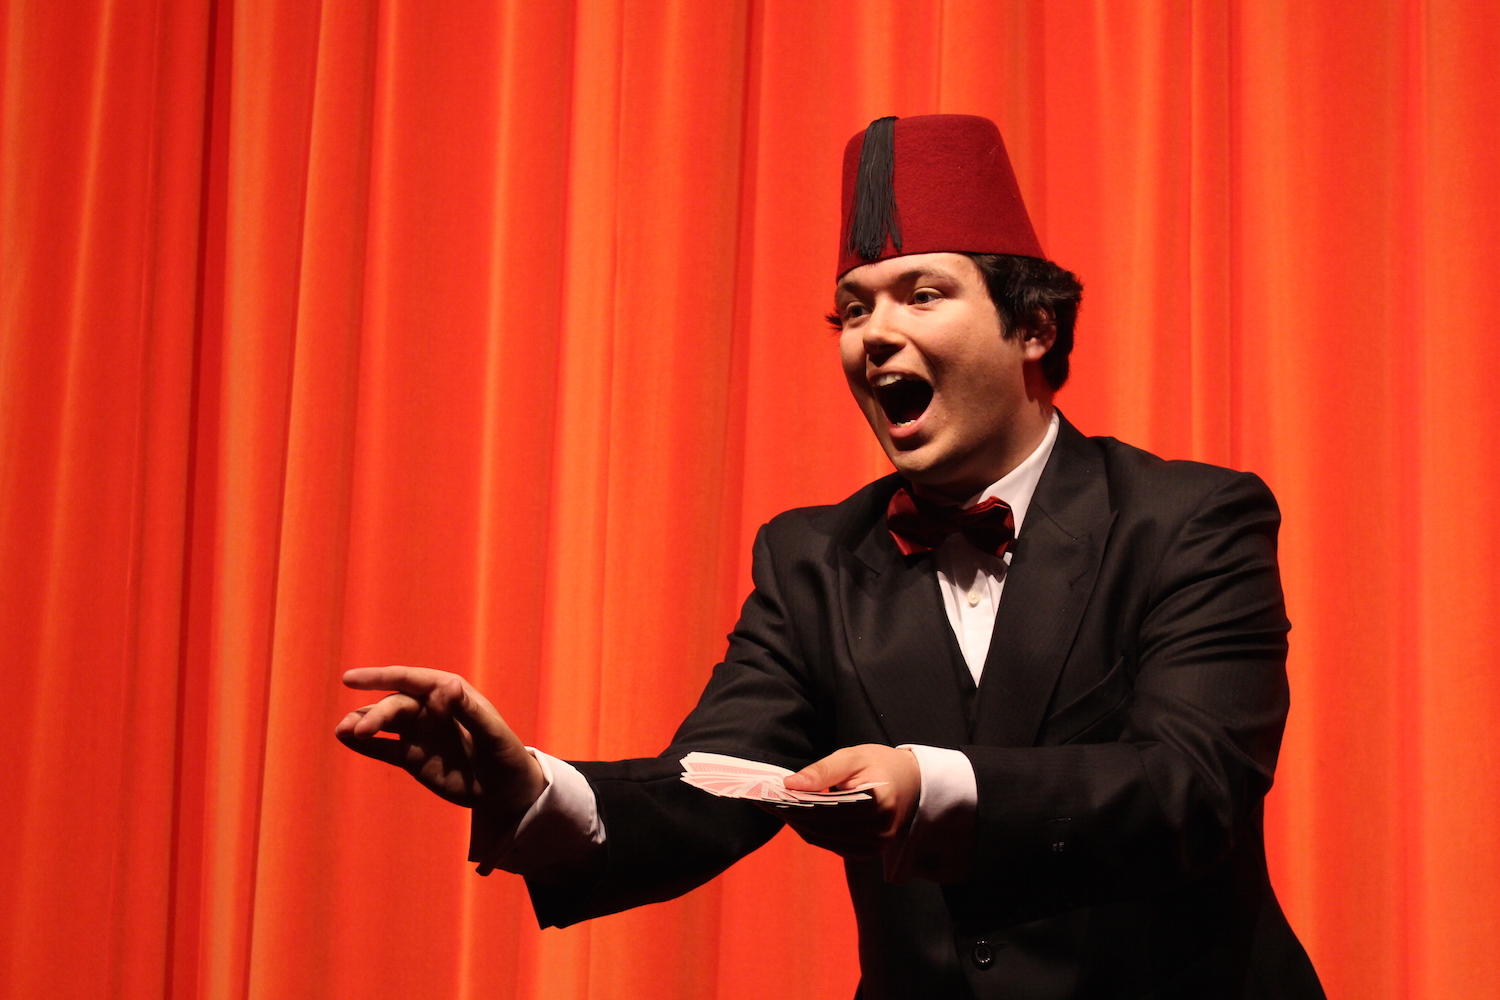 JUST LIKE THAT! THE TOMMY COOPER SHOW